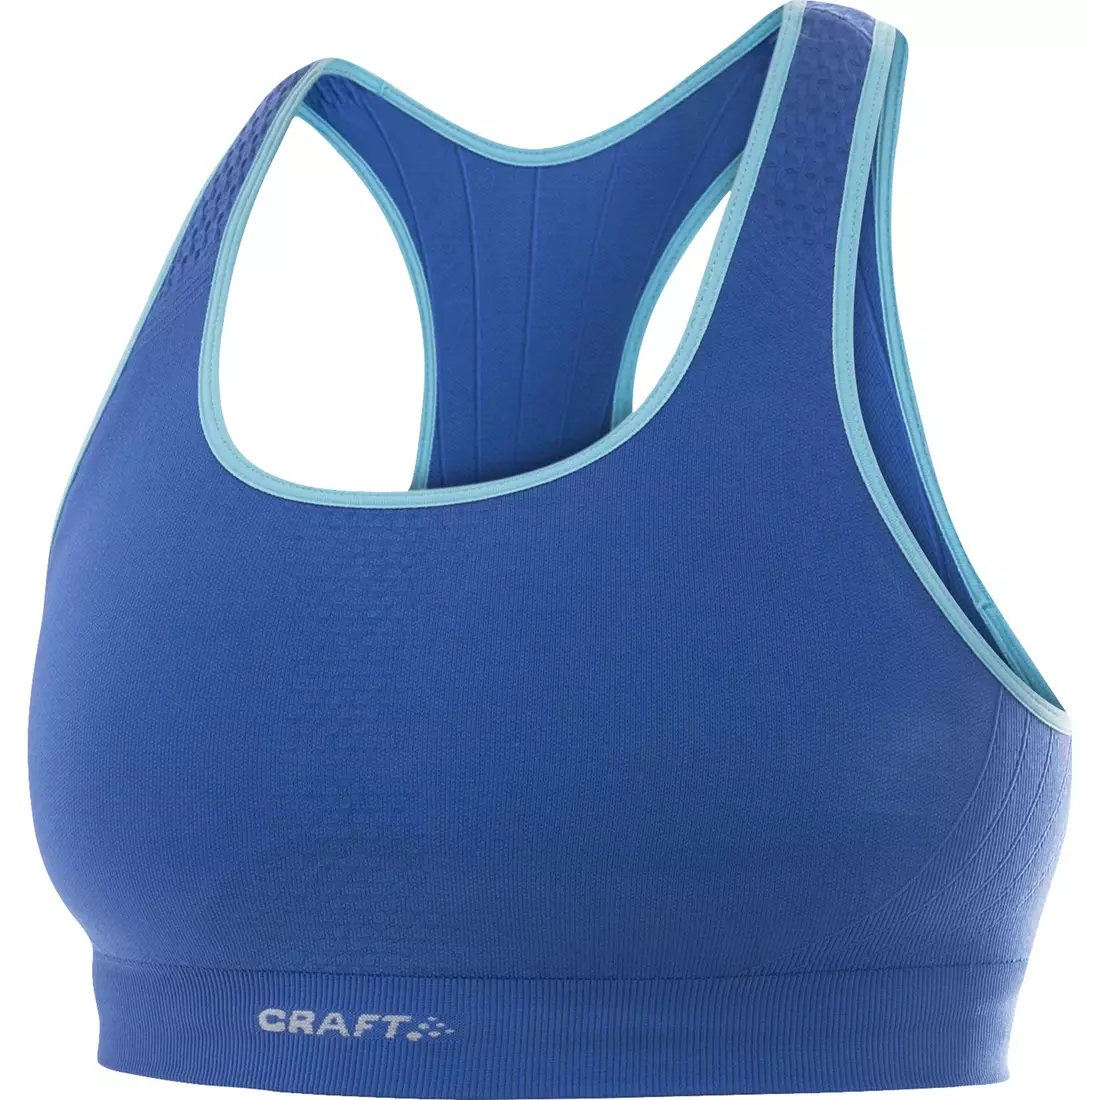 CRAFT Stay Cool Seamless - sports bra 1902551-2345, color: blue